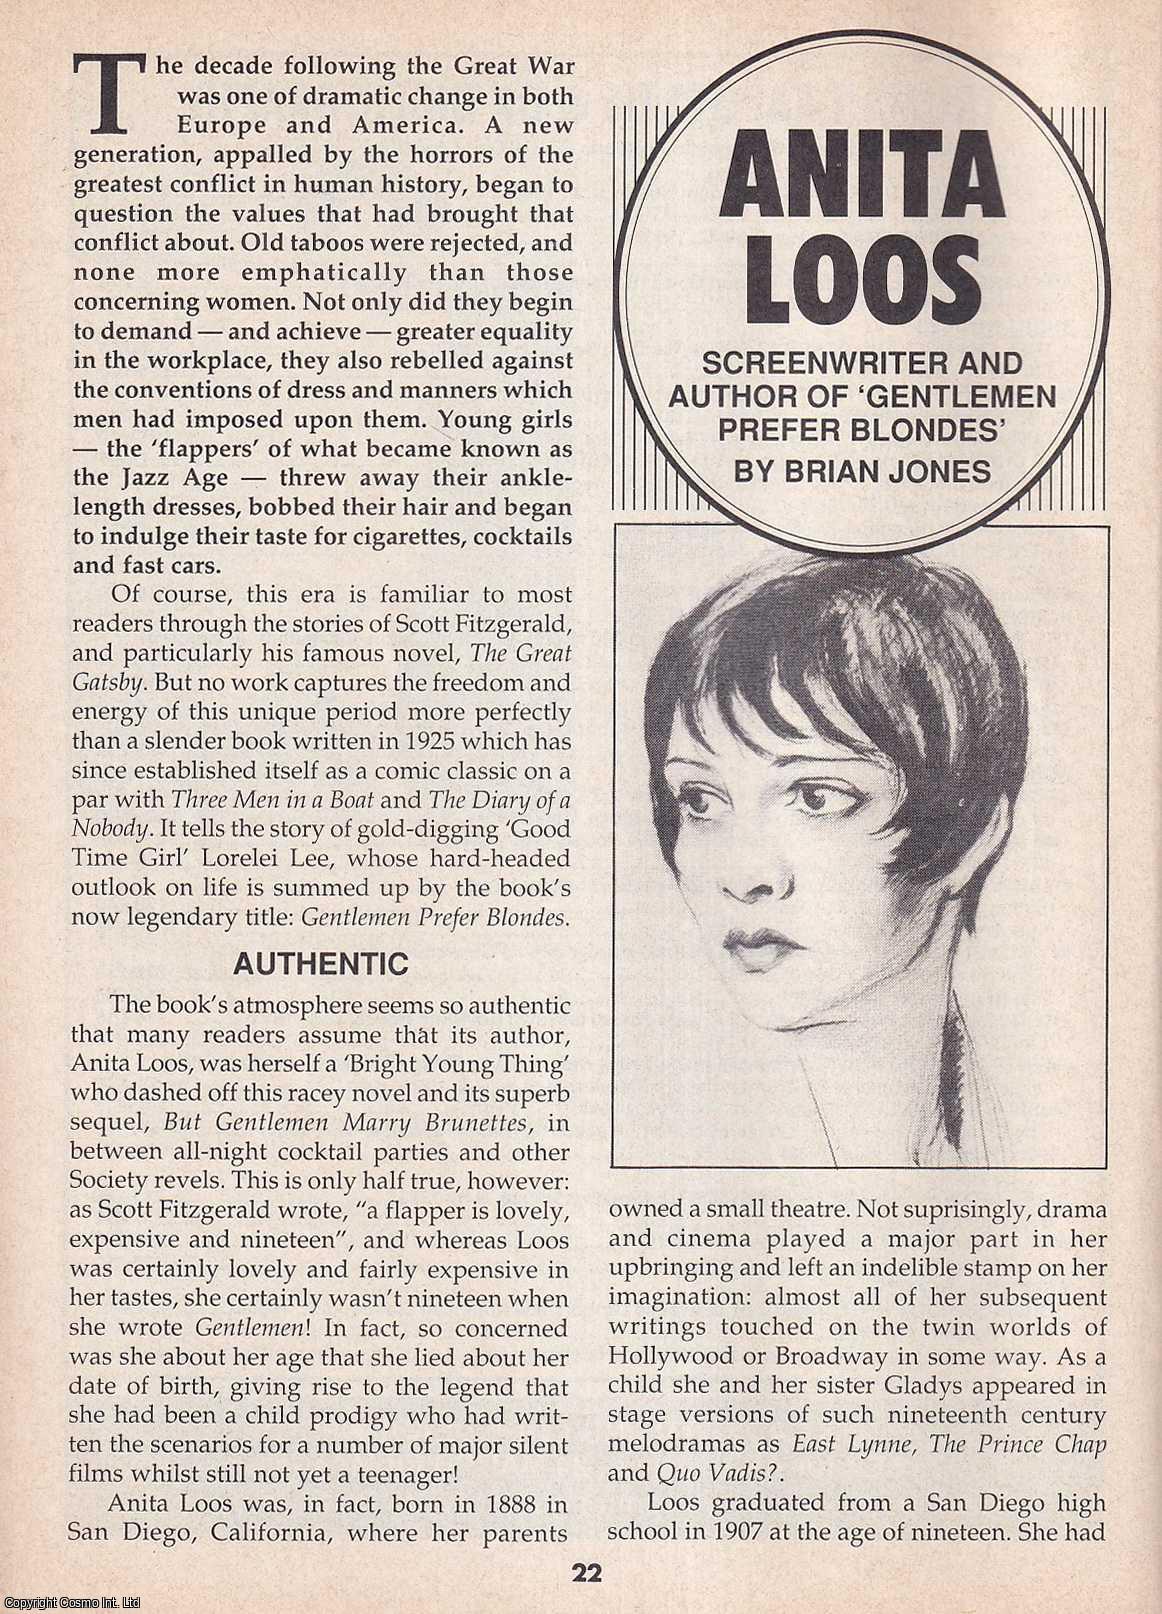 Brian Jones - Anita Loos. Screenwriter and Author. This is an original article separated from an issue of The Book & Magazine Collector publication.